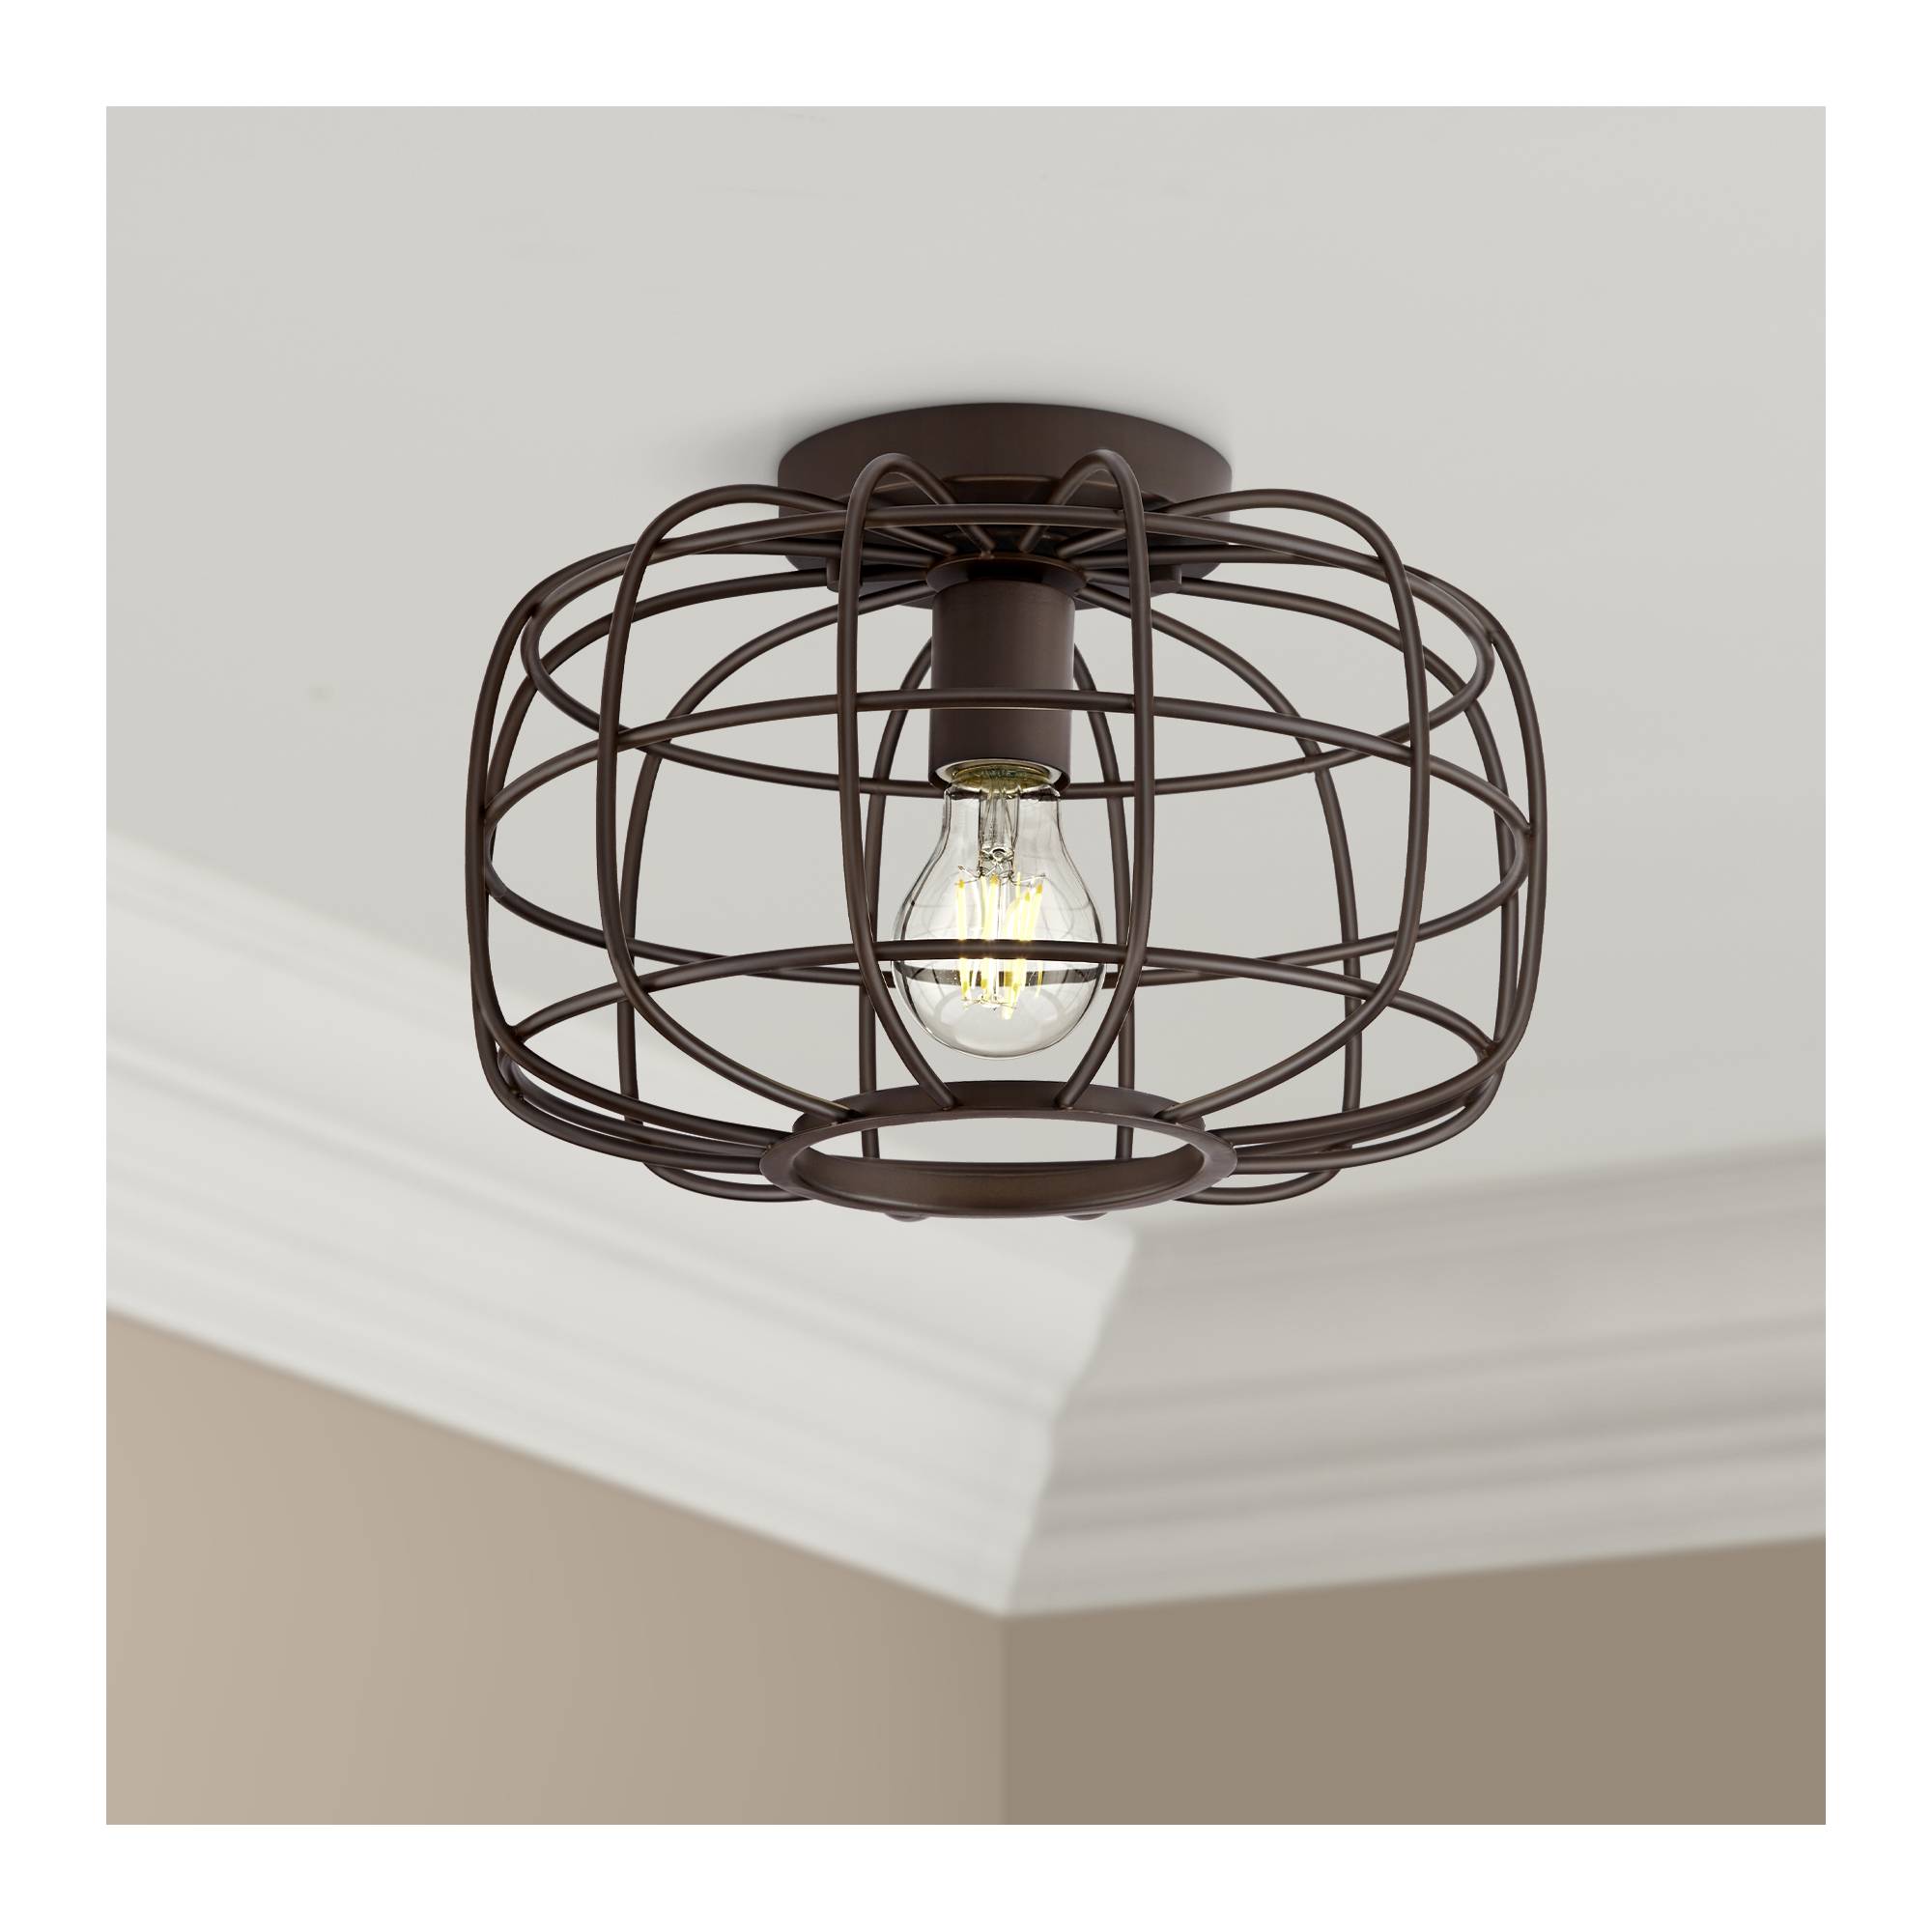 Details About Rustic Farmhouse Ceiling Light Flush Mount Fixture Oiled Bronze 12 For Bedroom